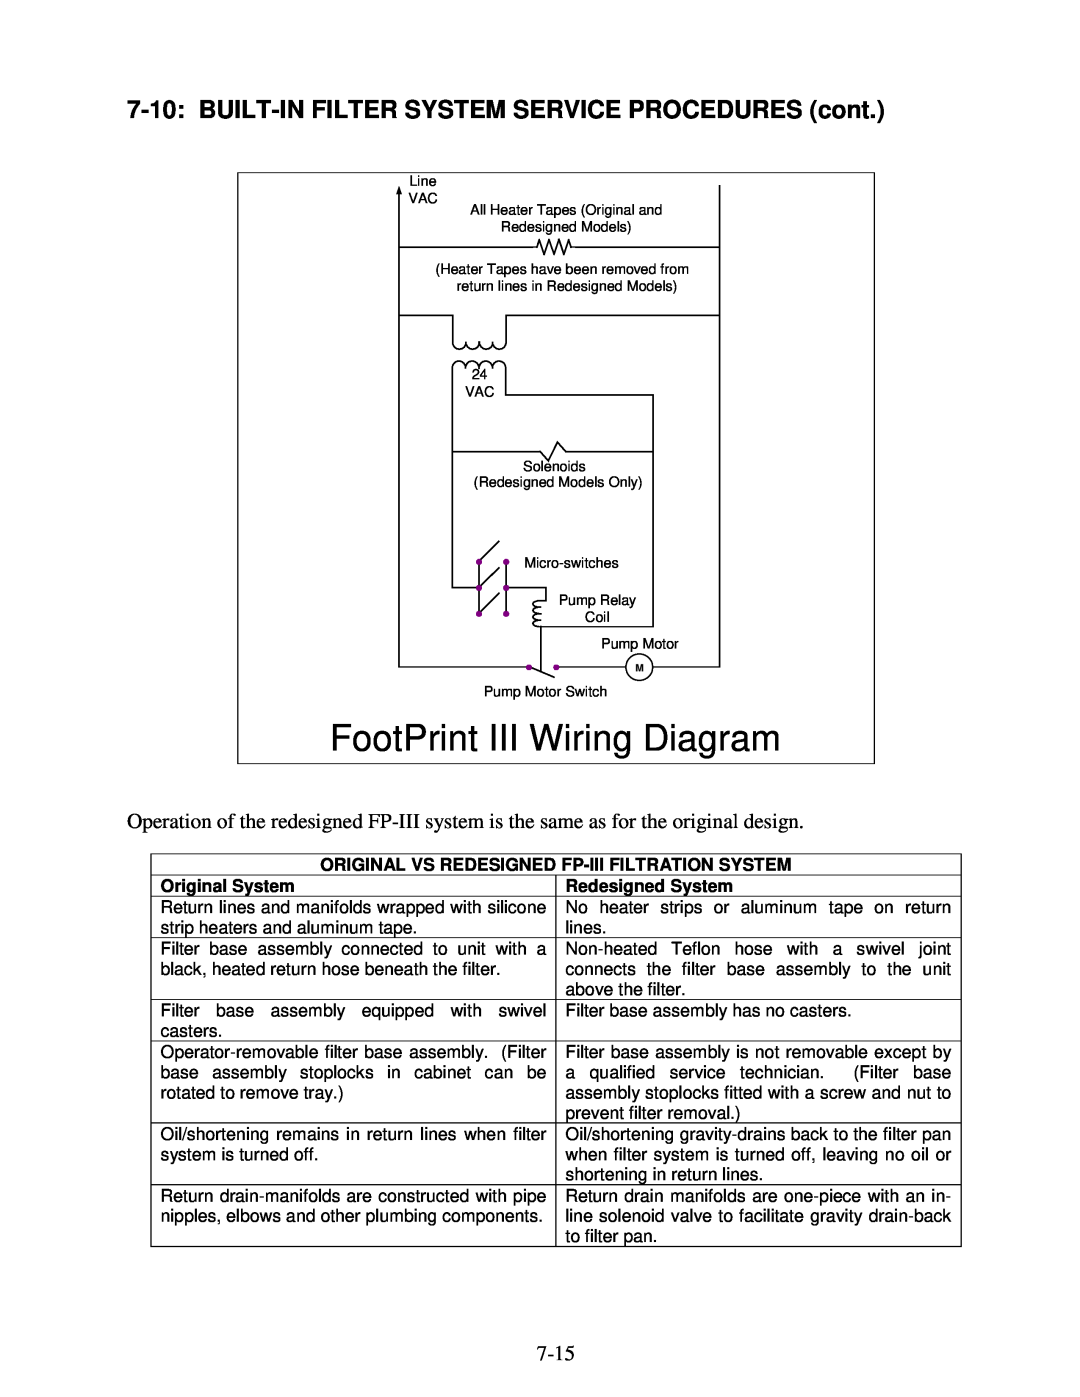 Frymaster H14 Series service manual FootPrint III Wiring Diagram, BUILT-IN FILTER SYSTEM SERVICE PROCEDURES cont, 7-15 